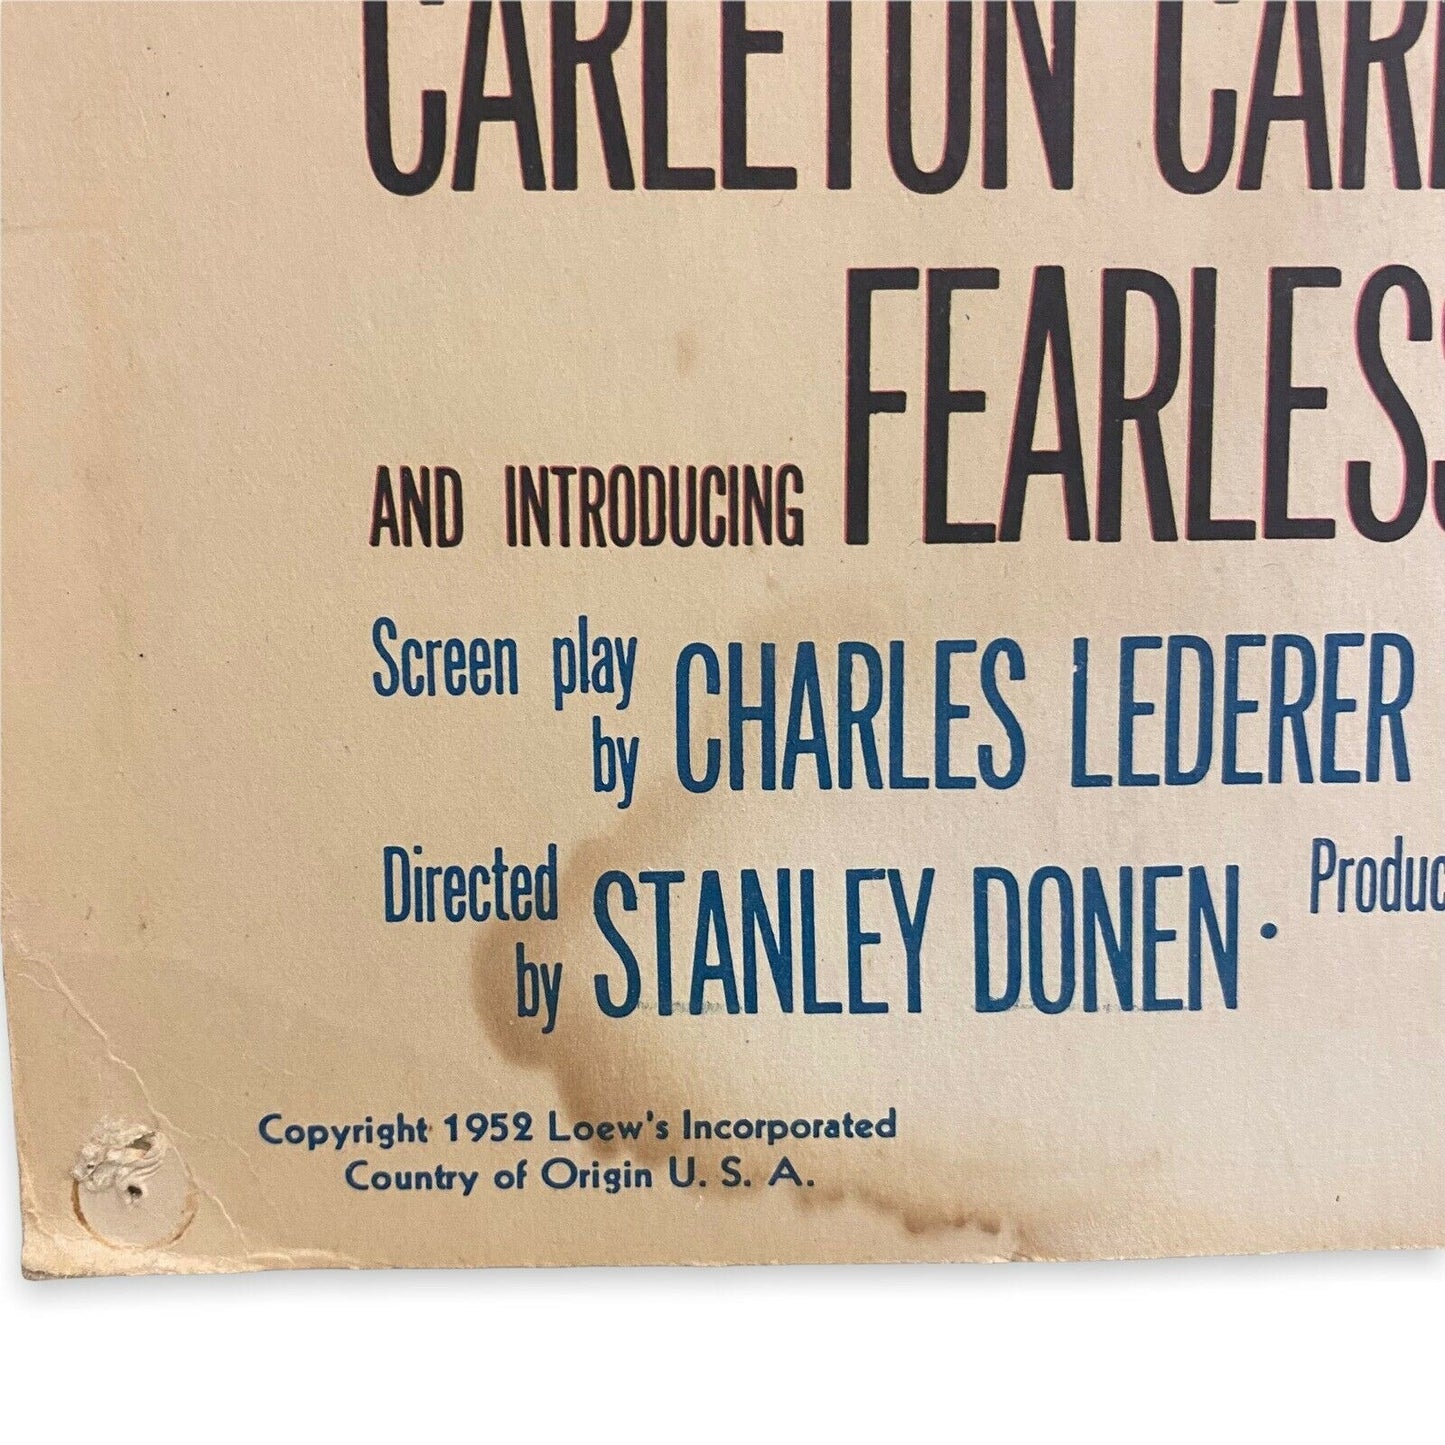 Fearless Fagan ORIGINAL 1952 Theater Window Card Poster The Famous Lion